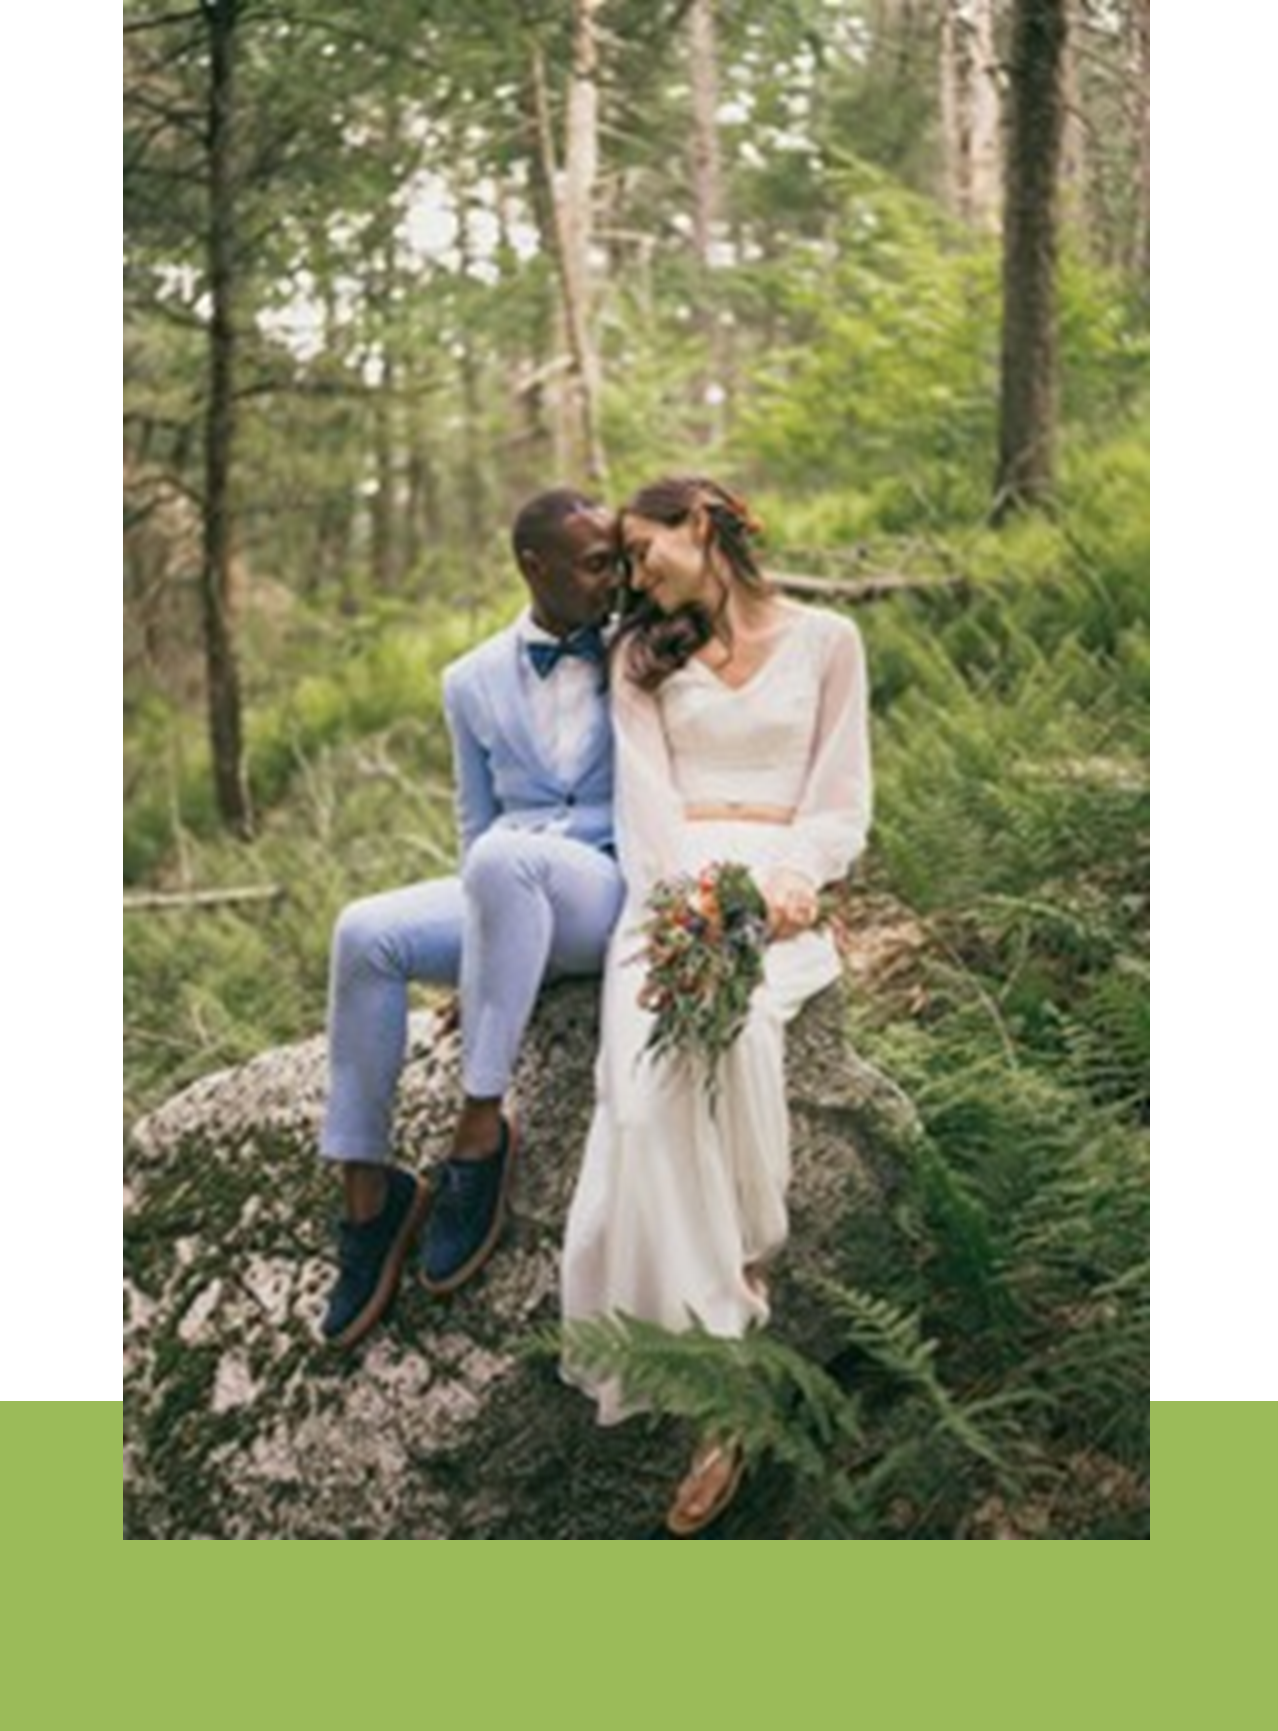 A bride and groom smiling at each other while sitting on a large rock in a lush forest. the bride holds a bouquet, and the groom wears a light blue suit.